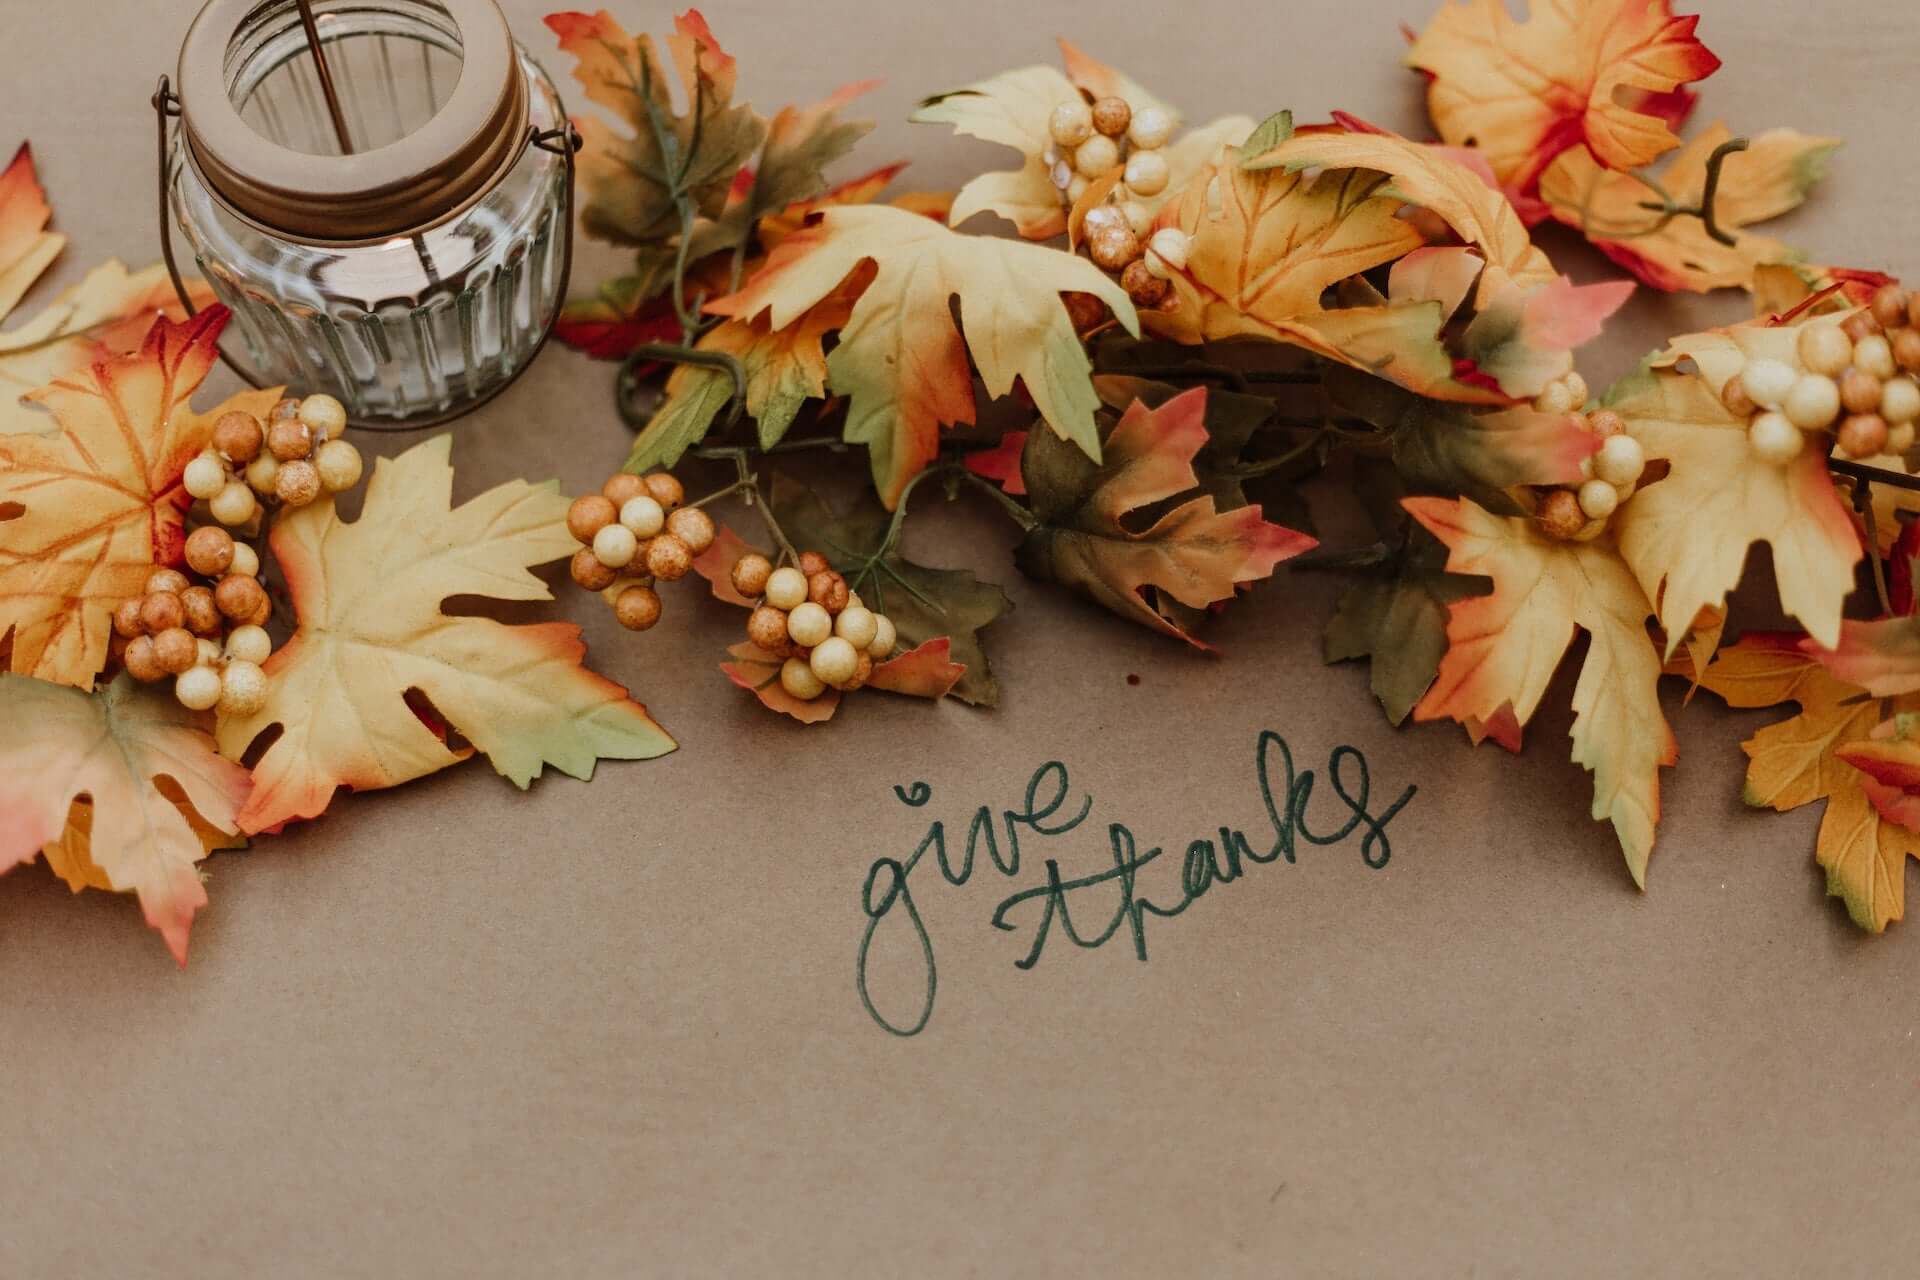 Autumn leaves with the text "give thanks" in cursive.